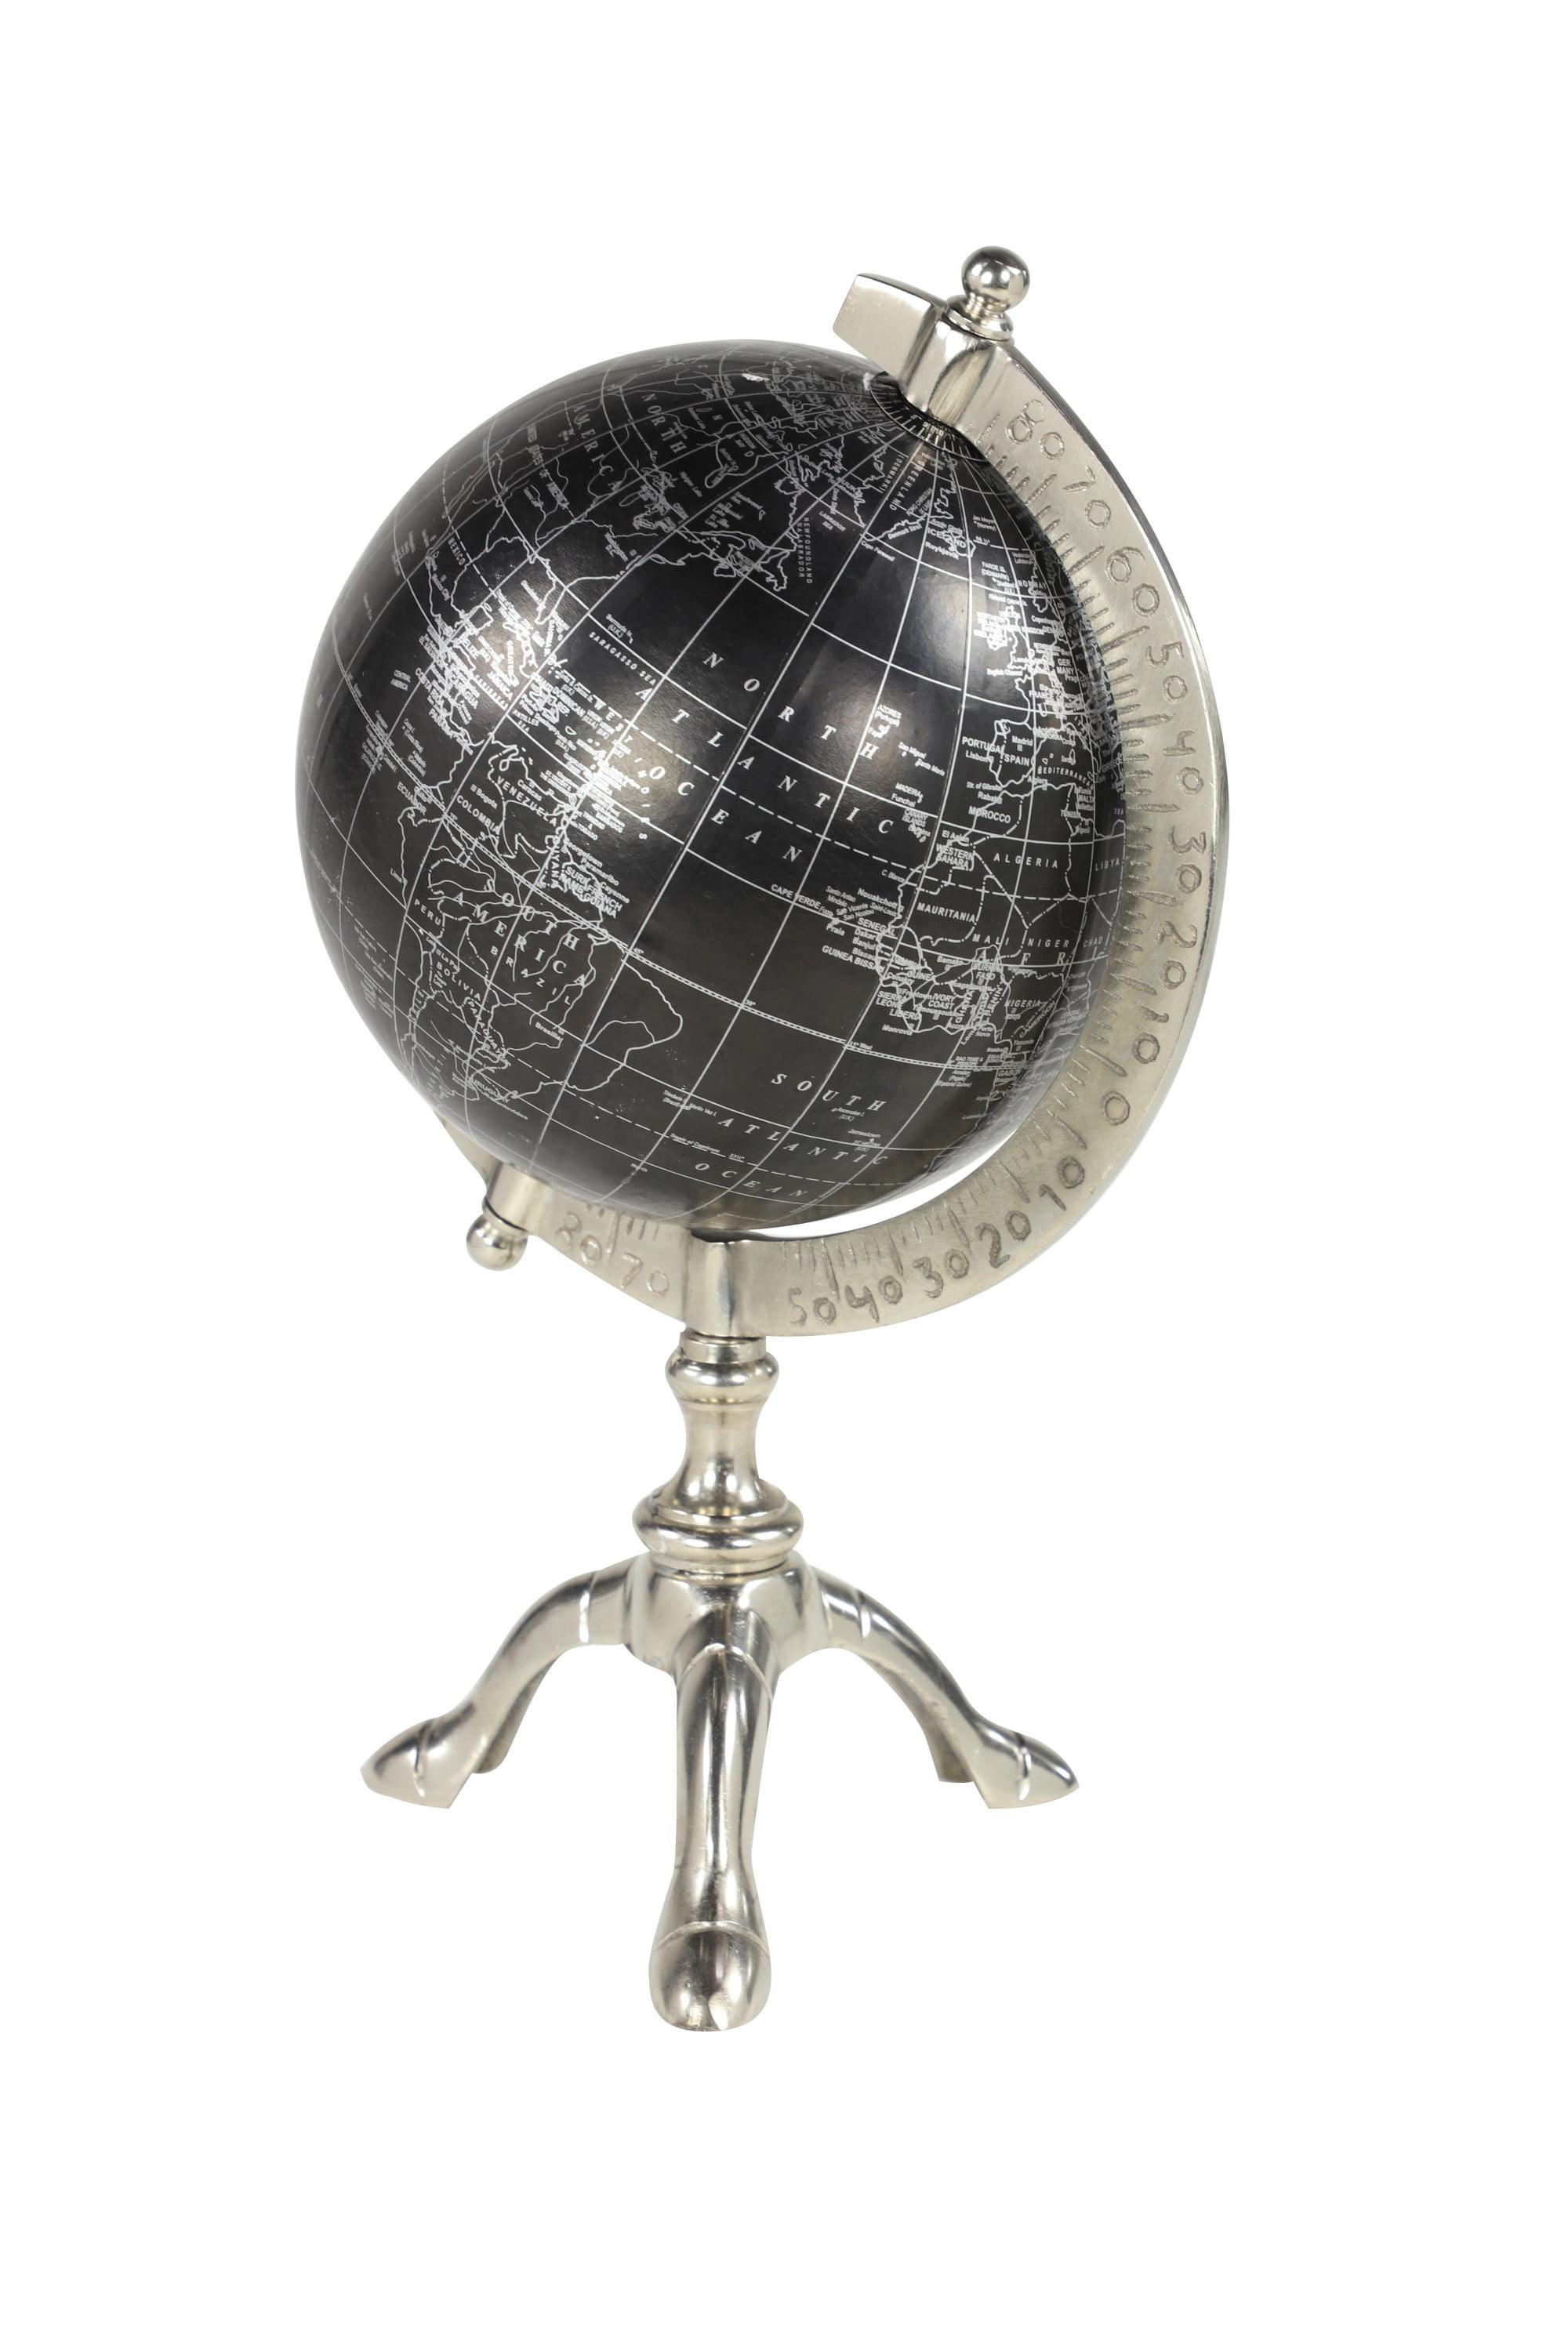 Rustic Black Abstract 7" Globe on Polished Metal Stand